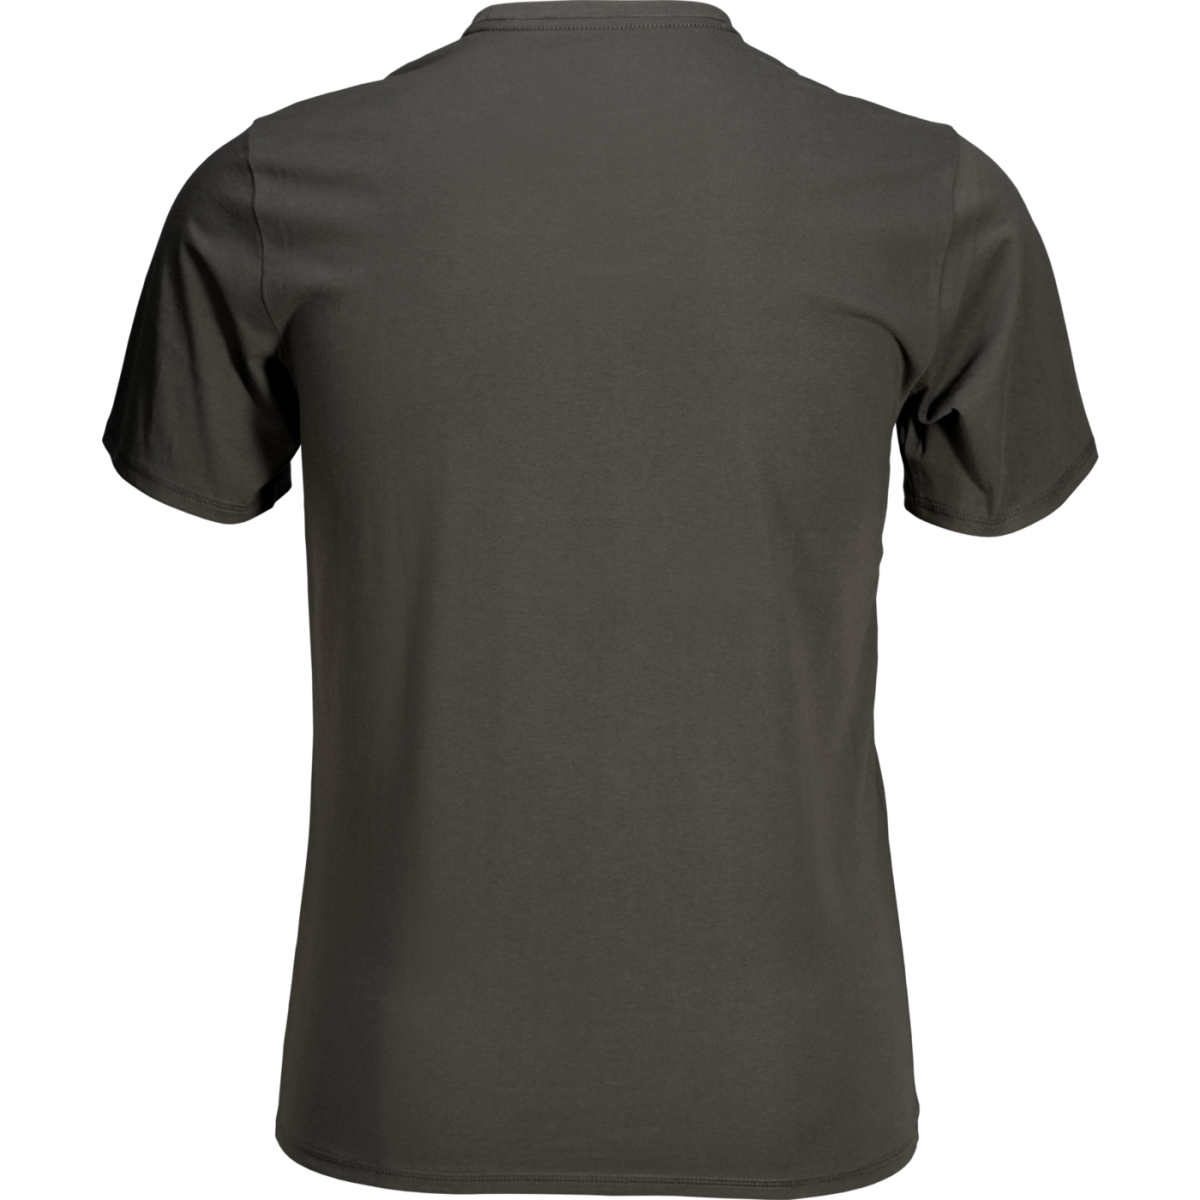 Seeland Outdoor 2 pack T shirt ( raven and pine green) back